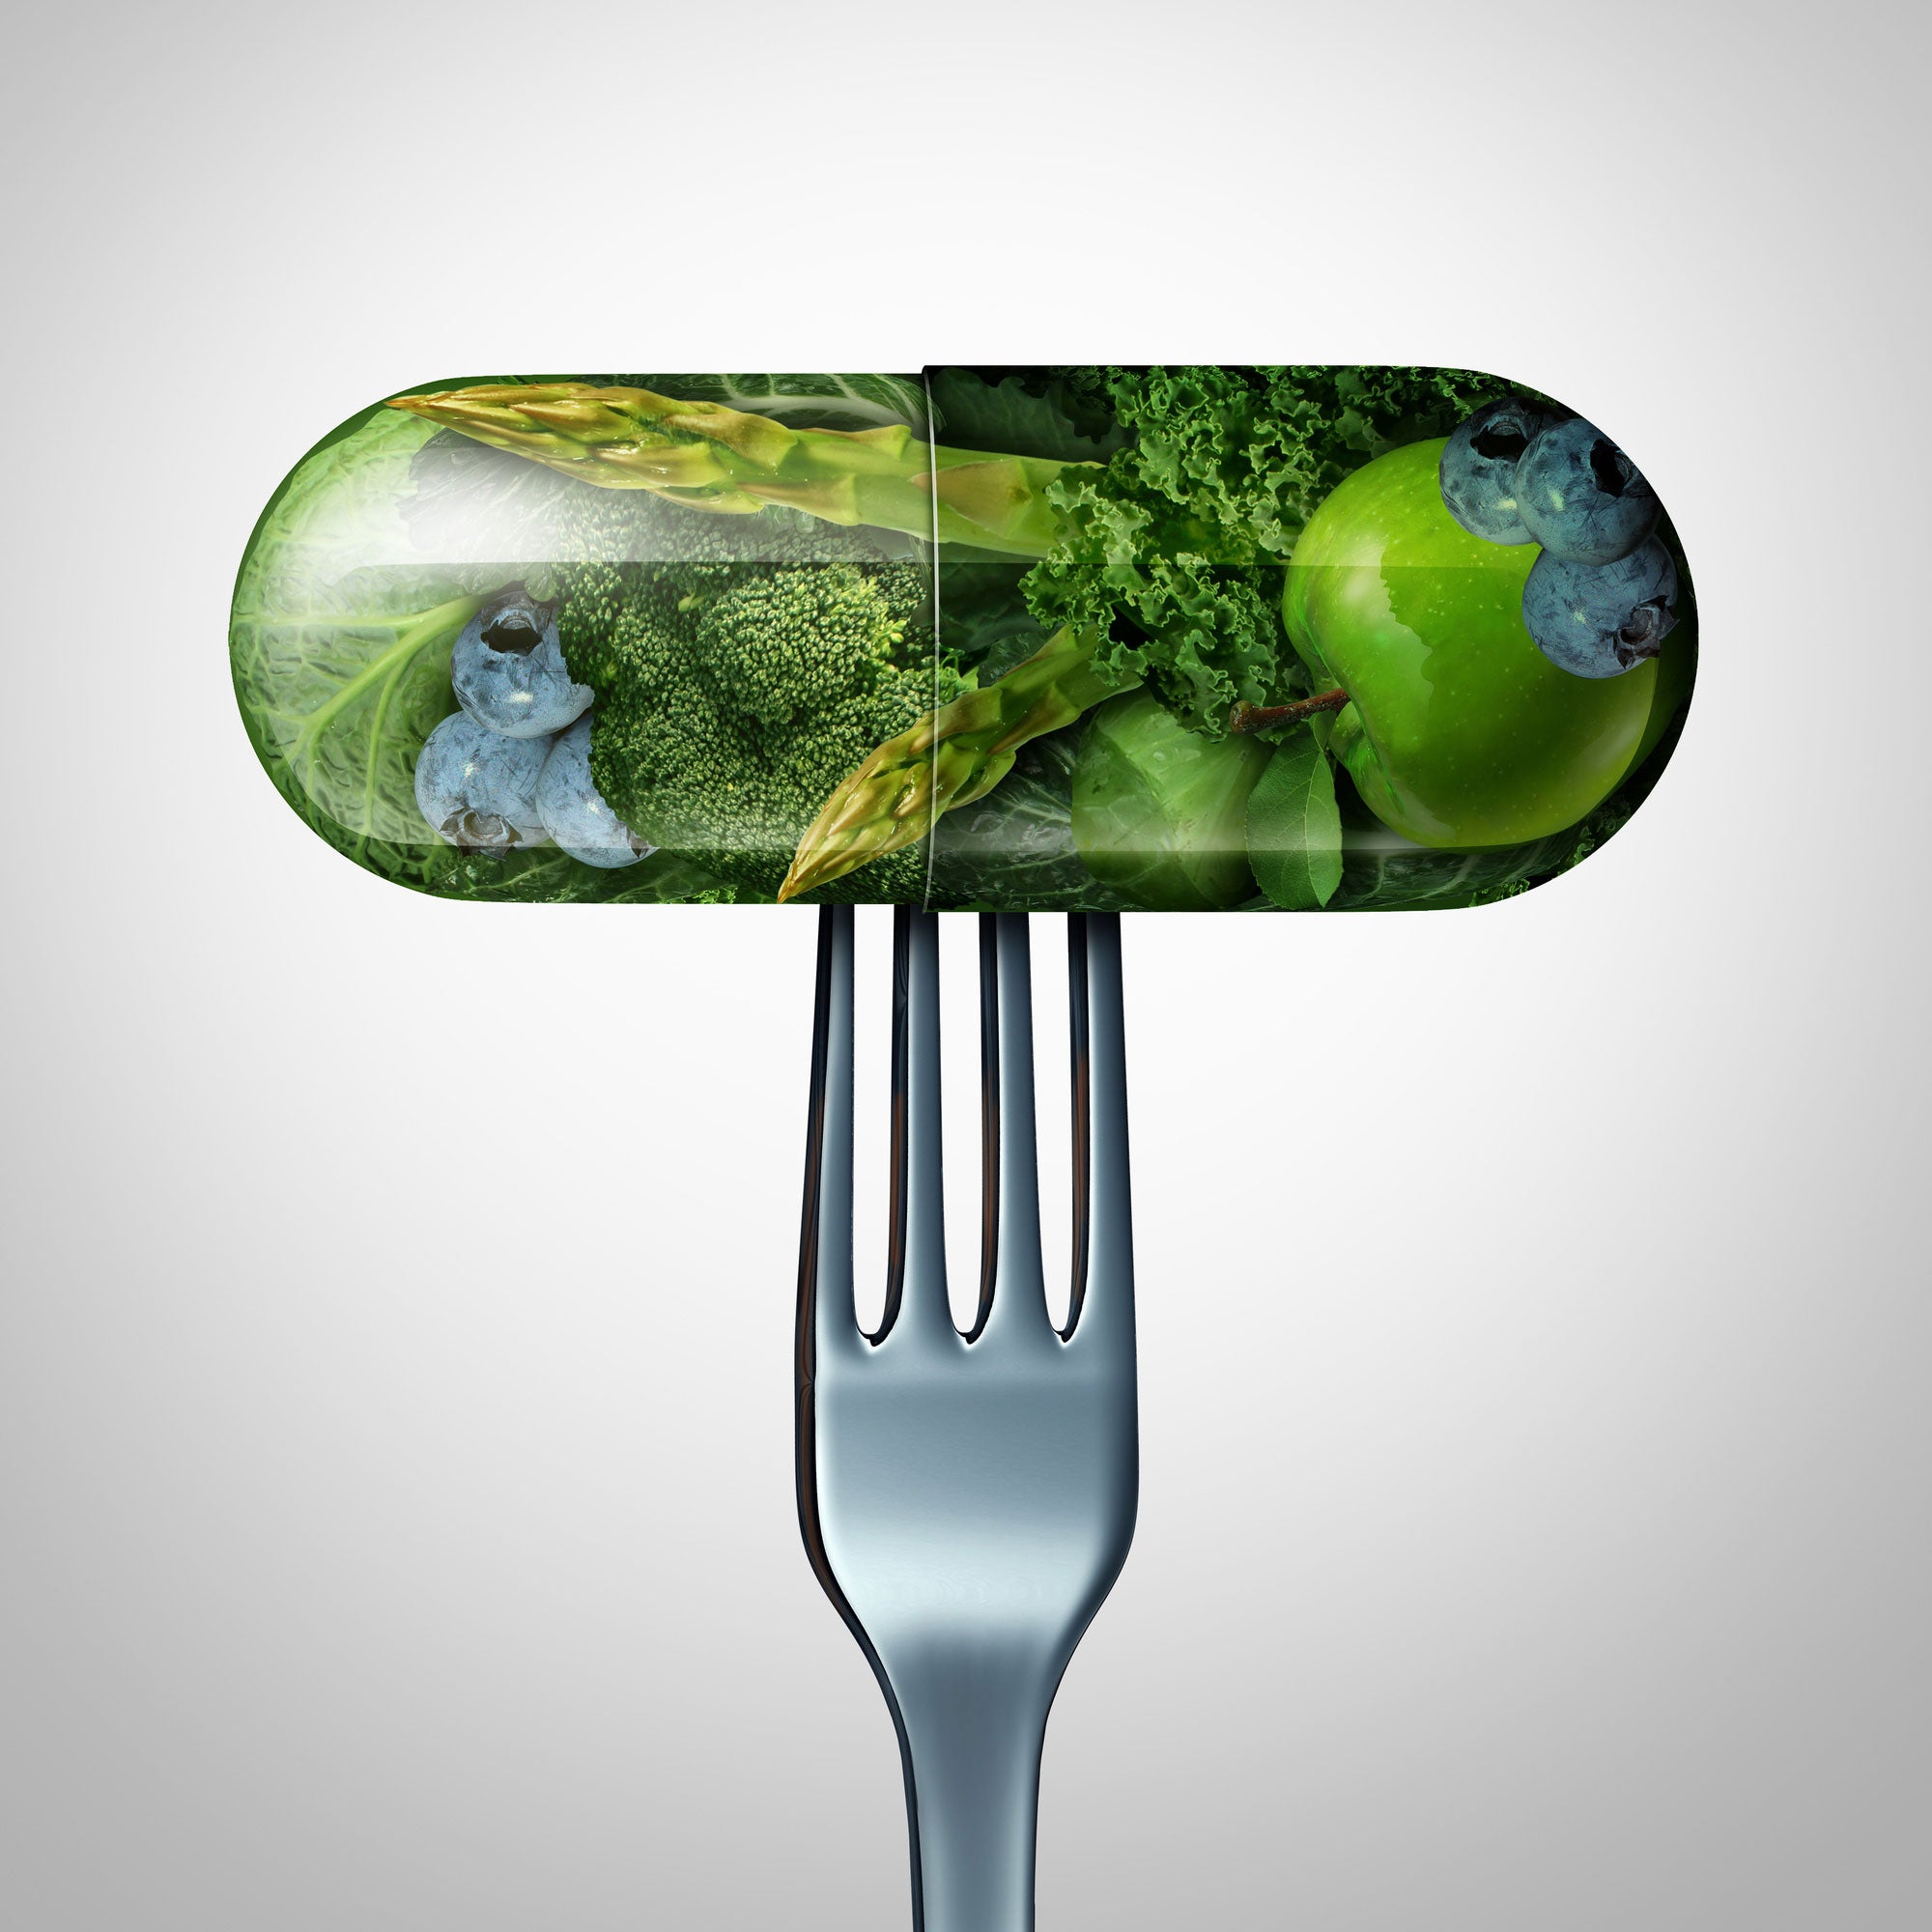 How Do Natural Organic Supplements Help Your Body?